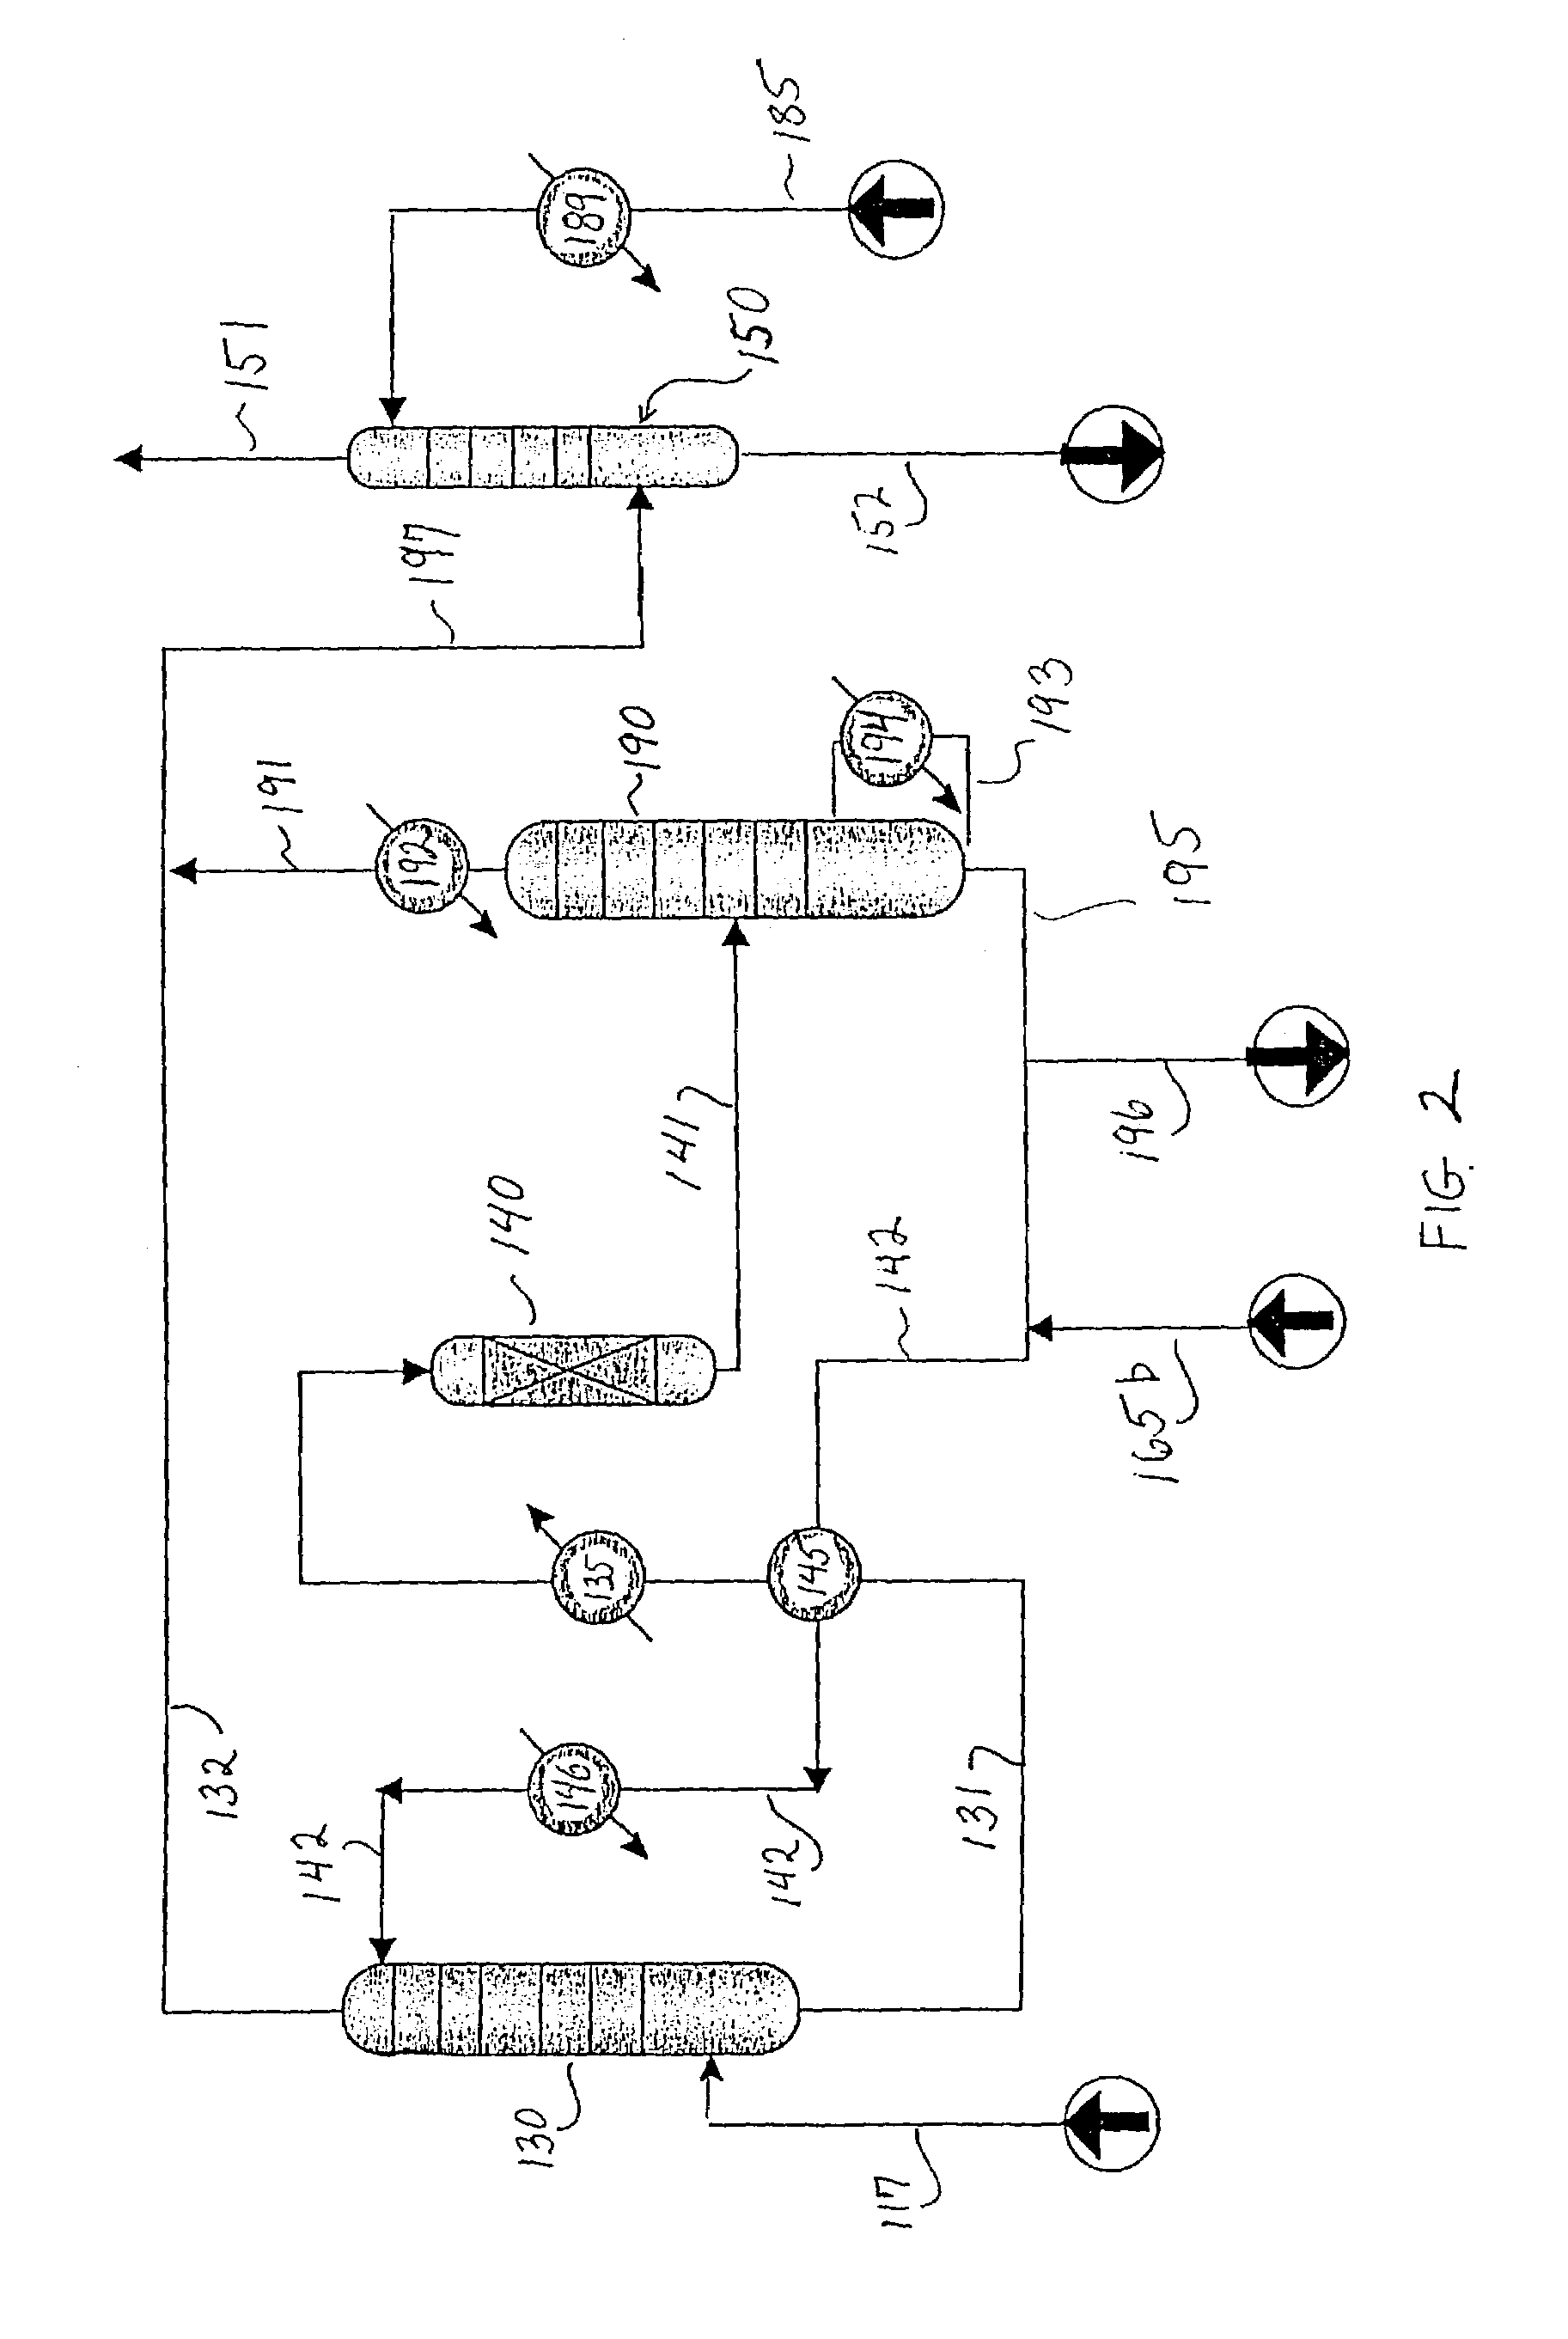 Process for the production of alkylbenzene with ethane stripping